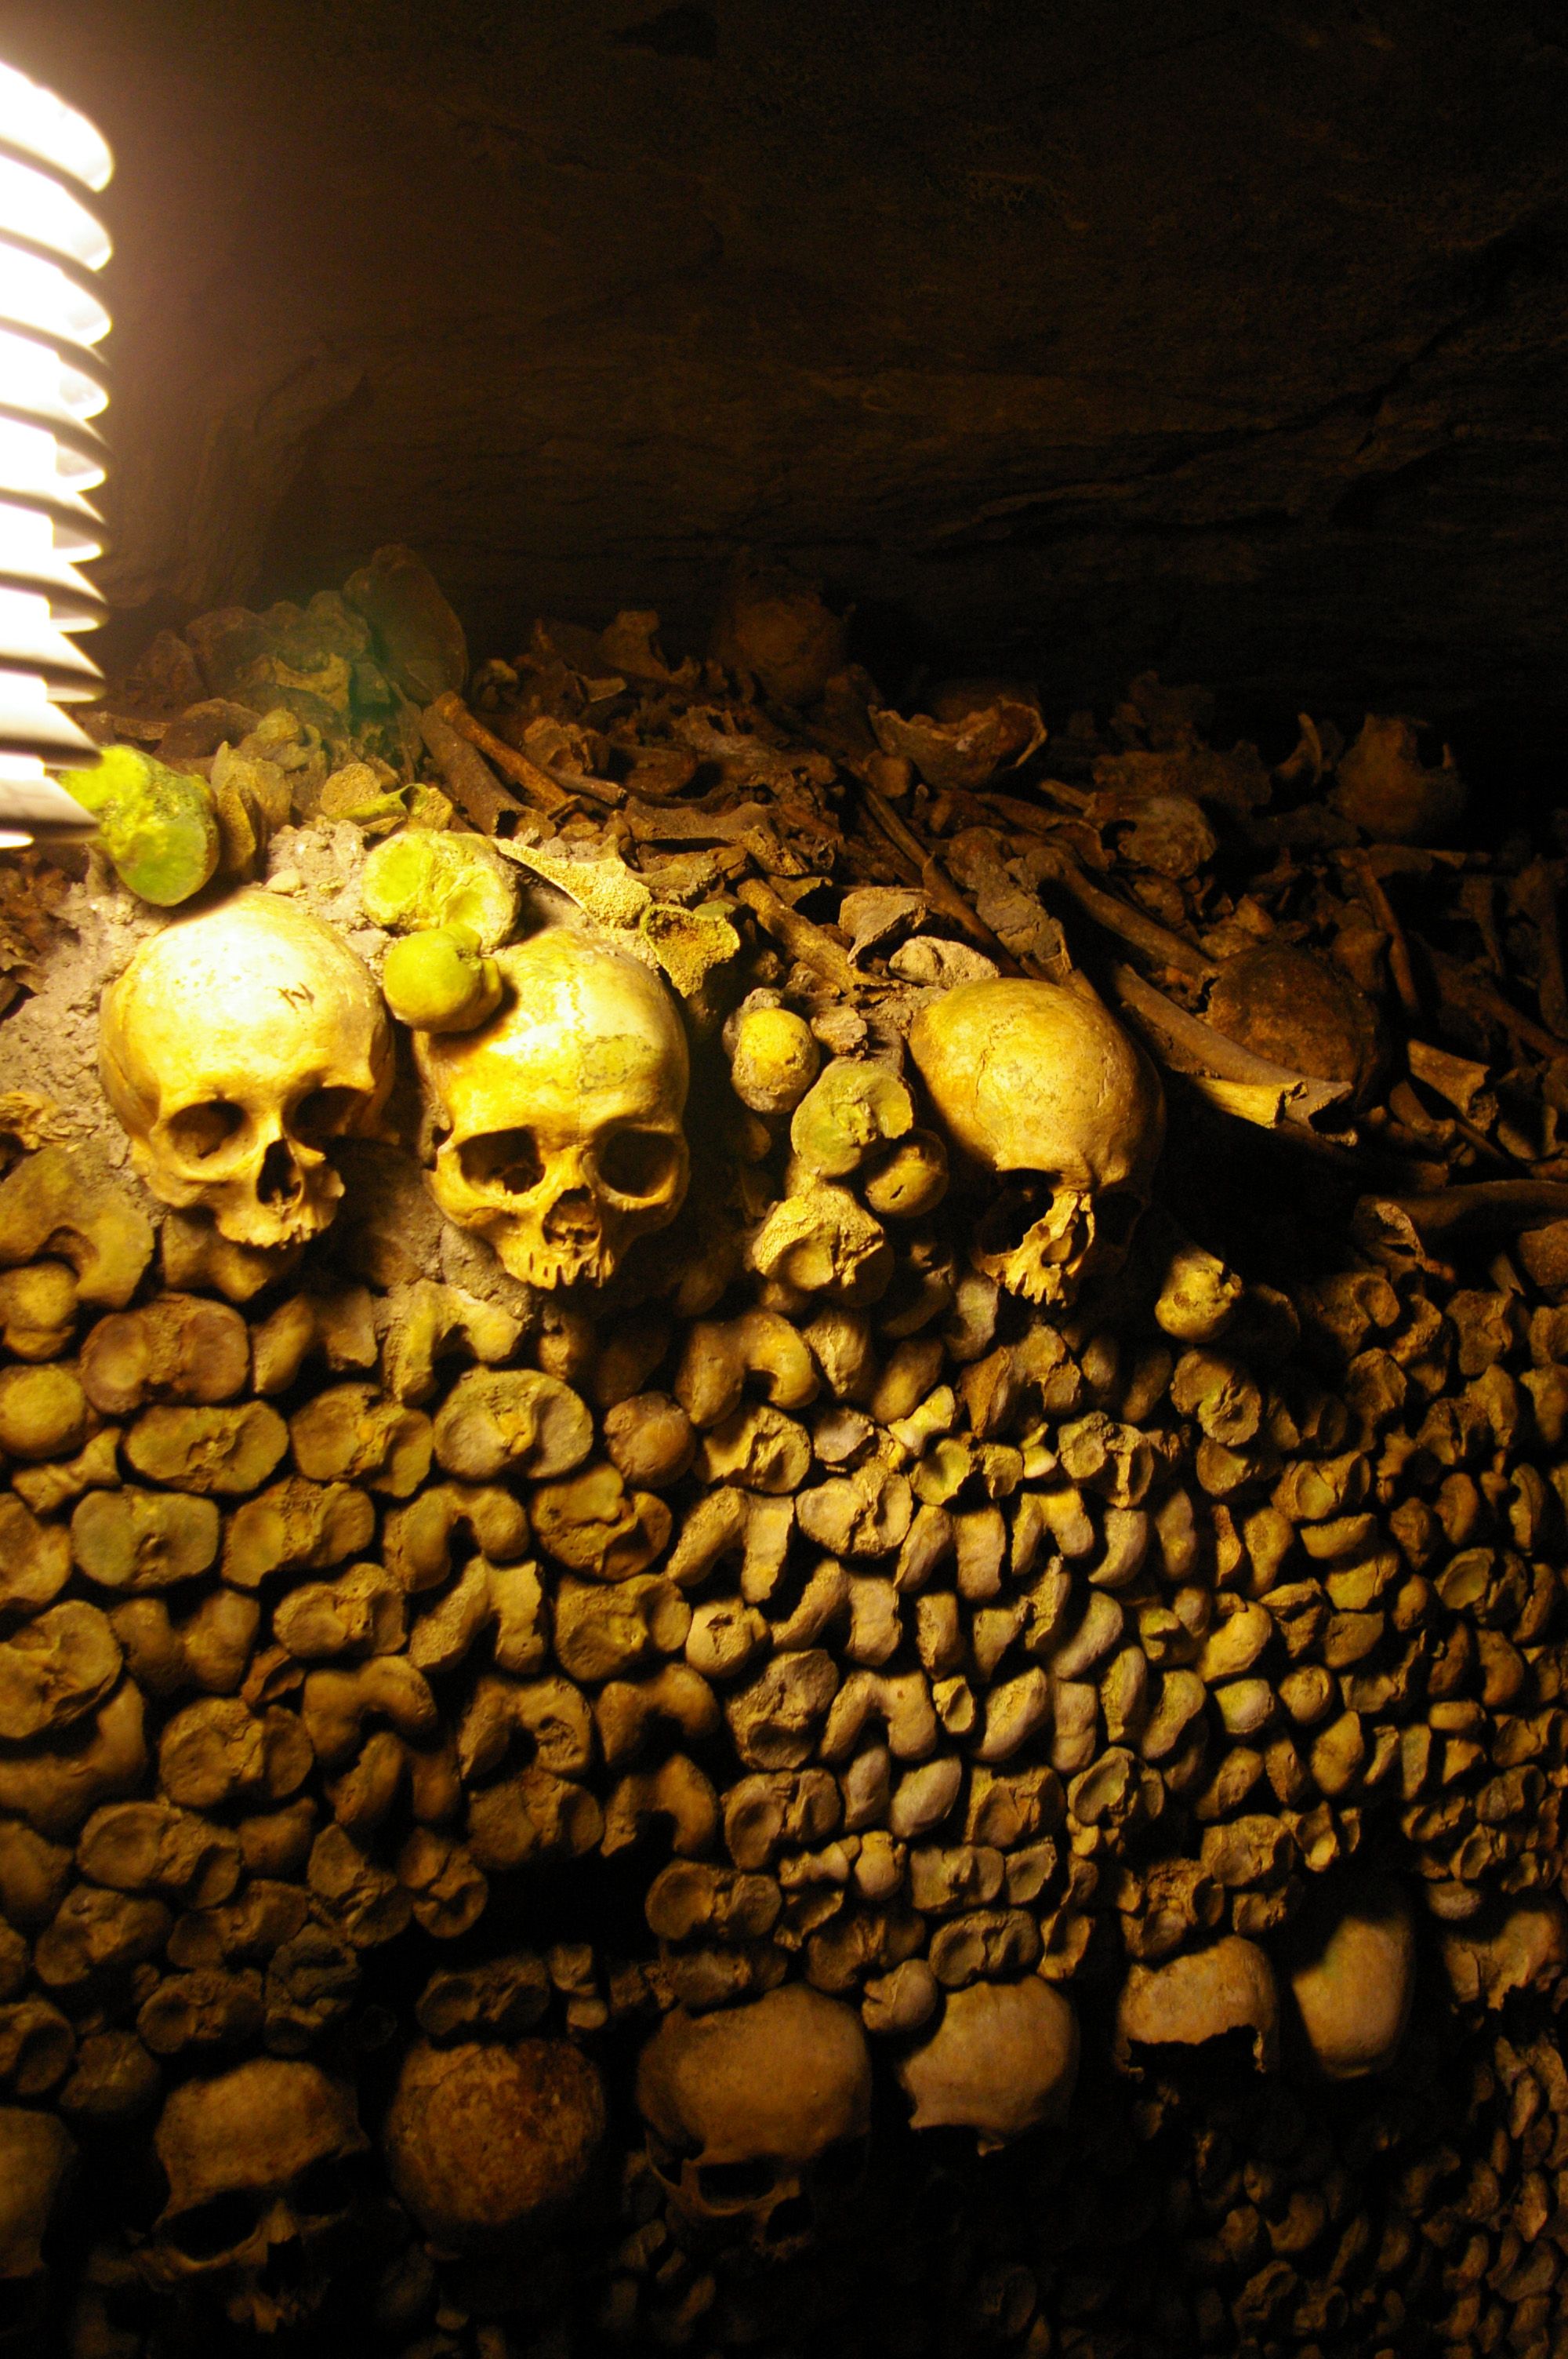 Catacombs - Paris France Underground crypt said to contain the ...